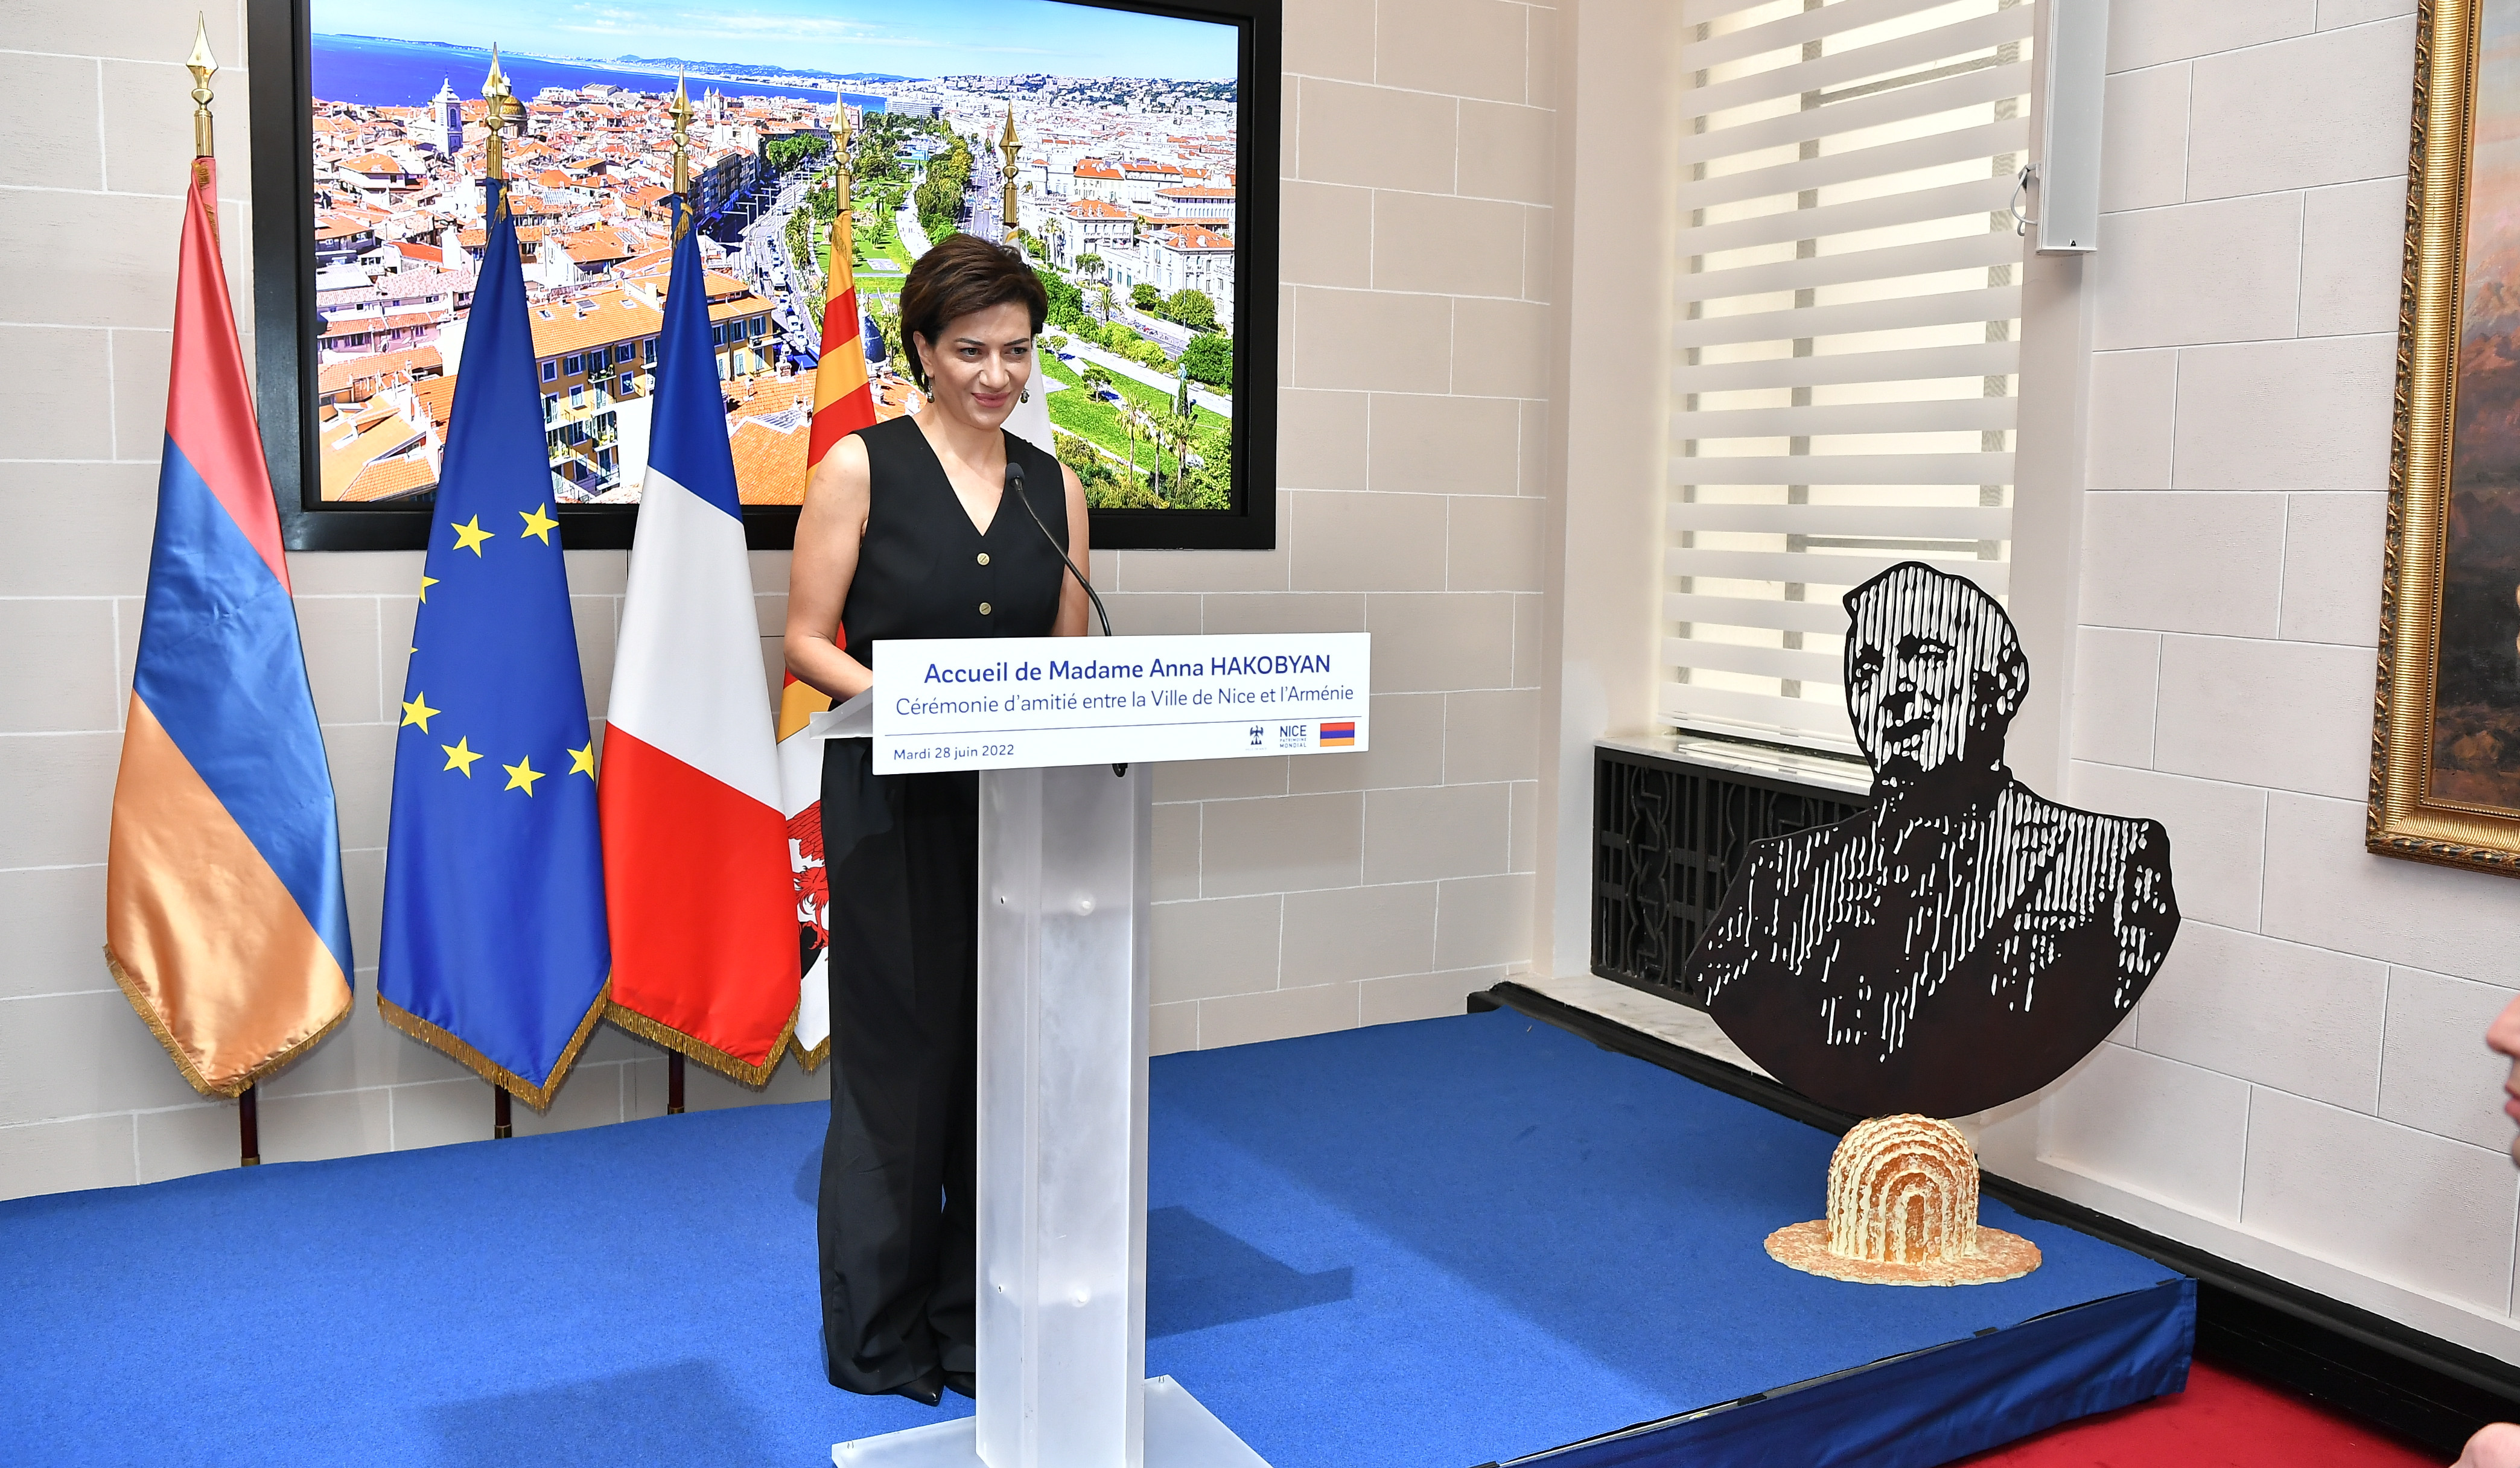 Armenian PM’s wife hosted at Nice City Hall